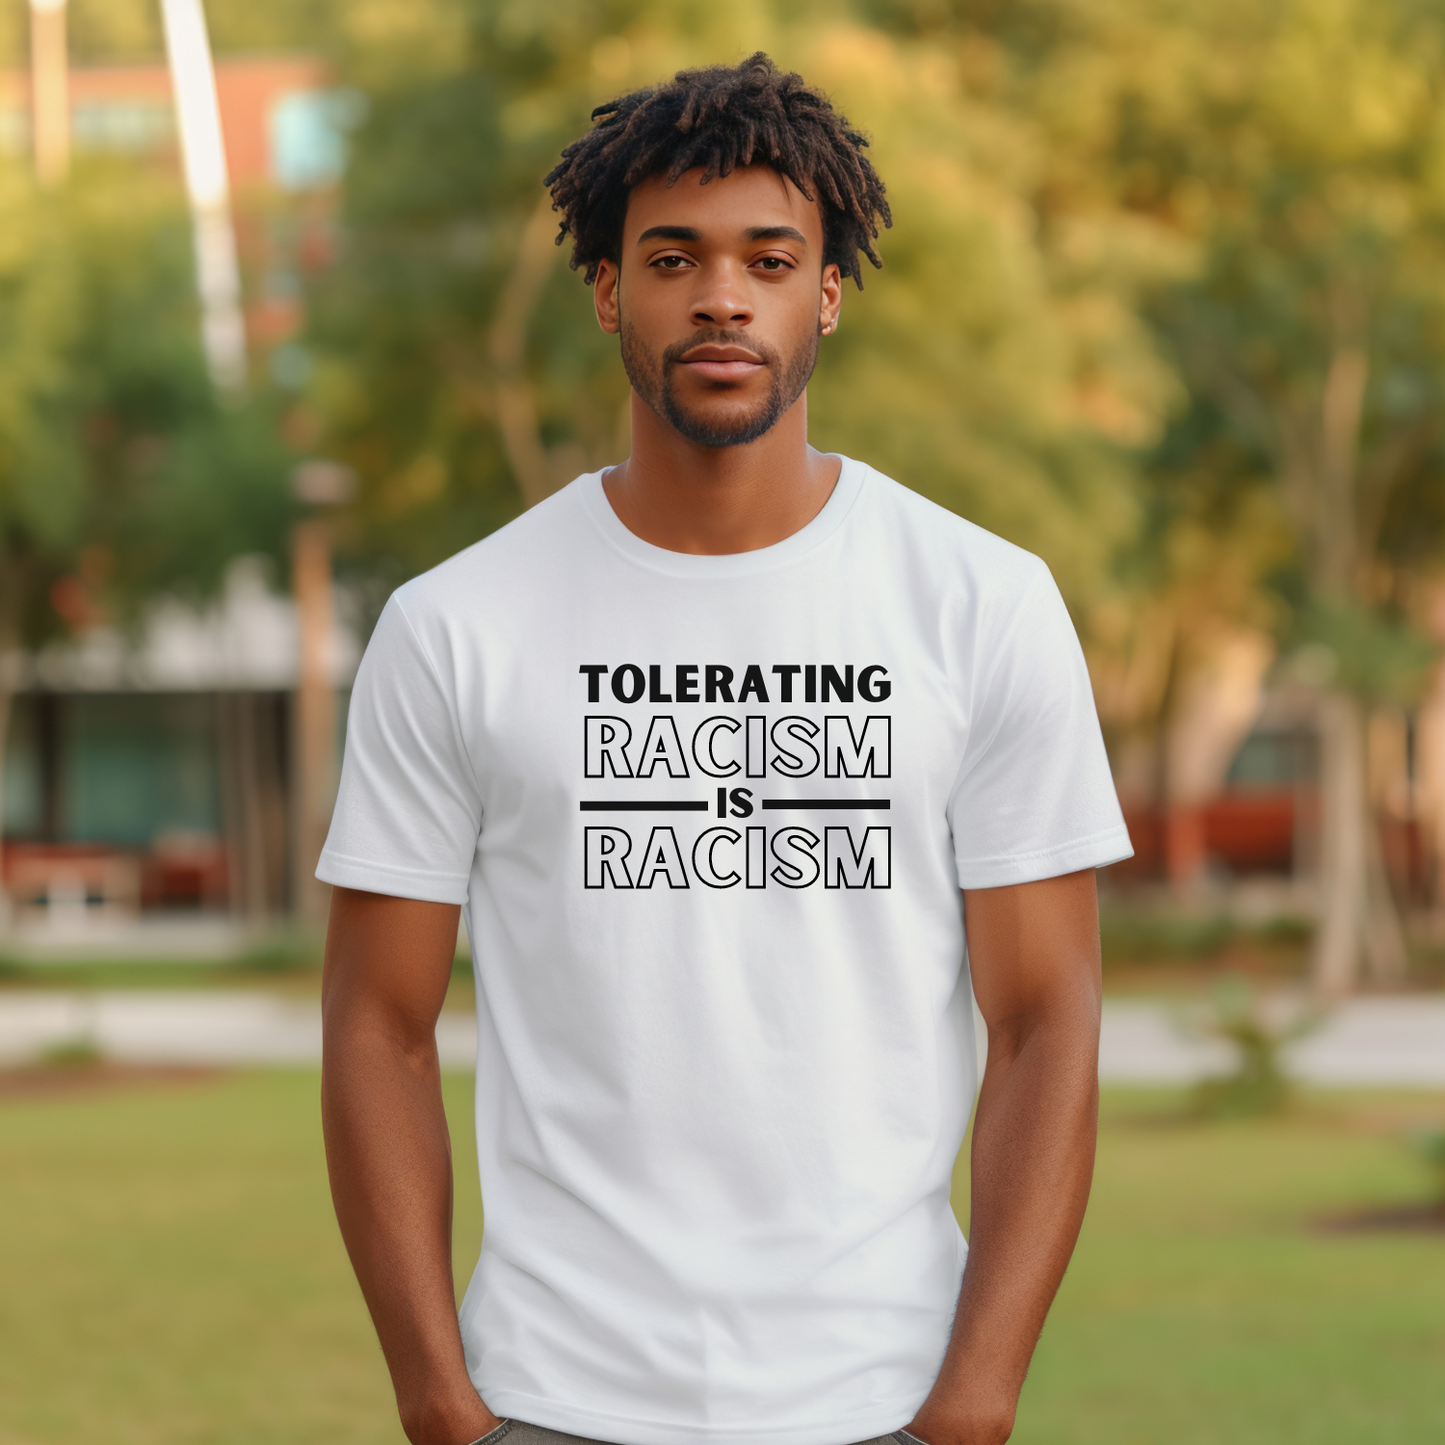 Make a bold statement for justice and equality with this tee that states, 'Tolerating racism is racism.' - Bella Canvas 3001 in white.